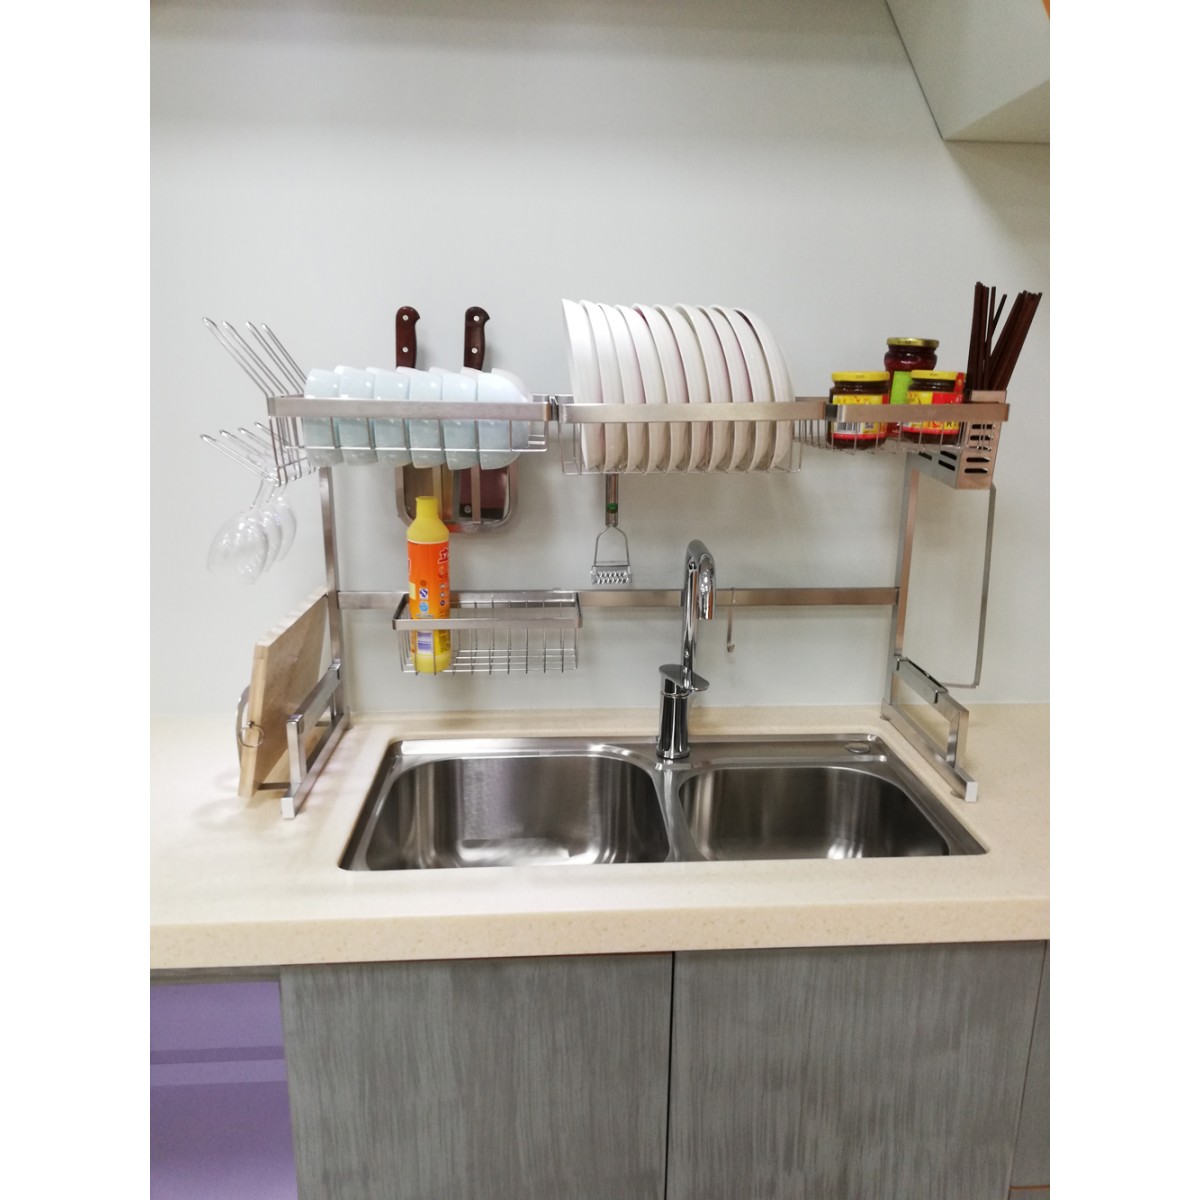 1pc Stainless Steel Sink Drying Rack, Modern Adjustable Over The Sink Dish  Rack For Kitchen